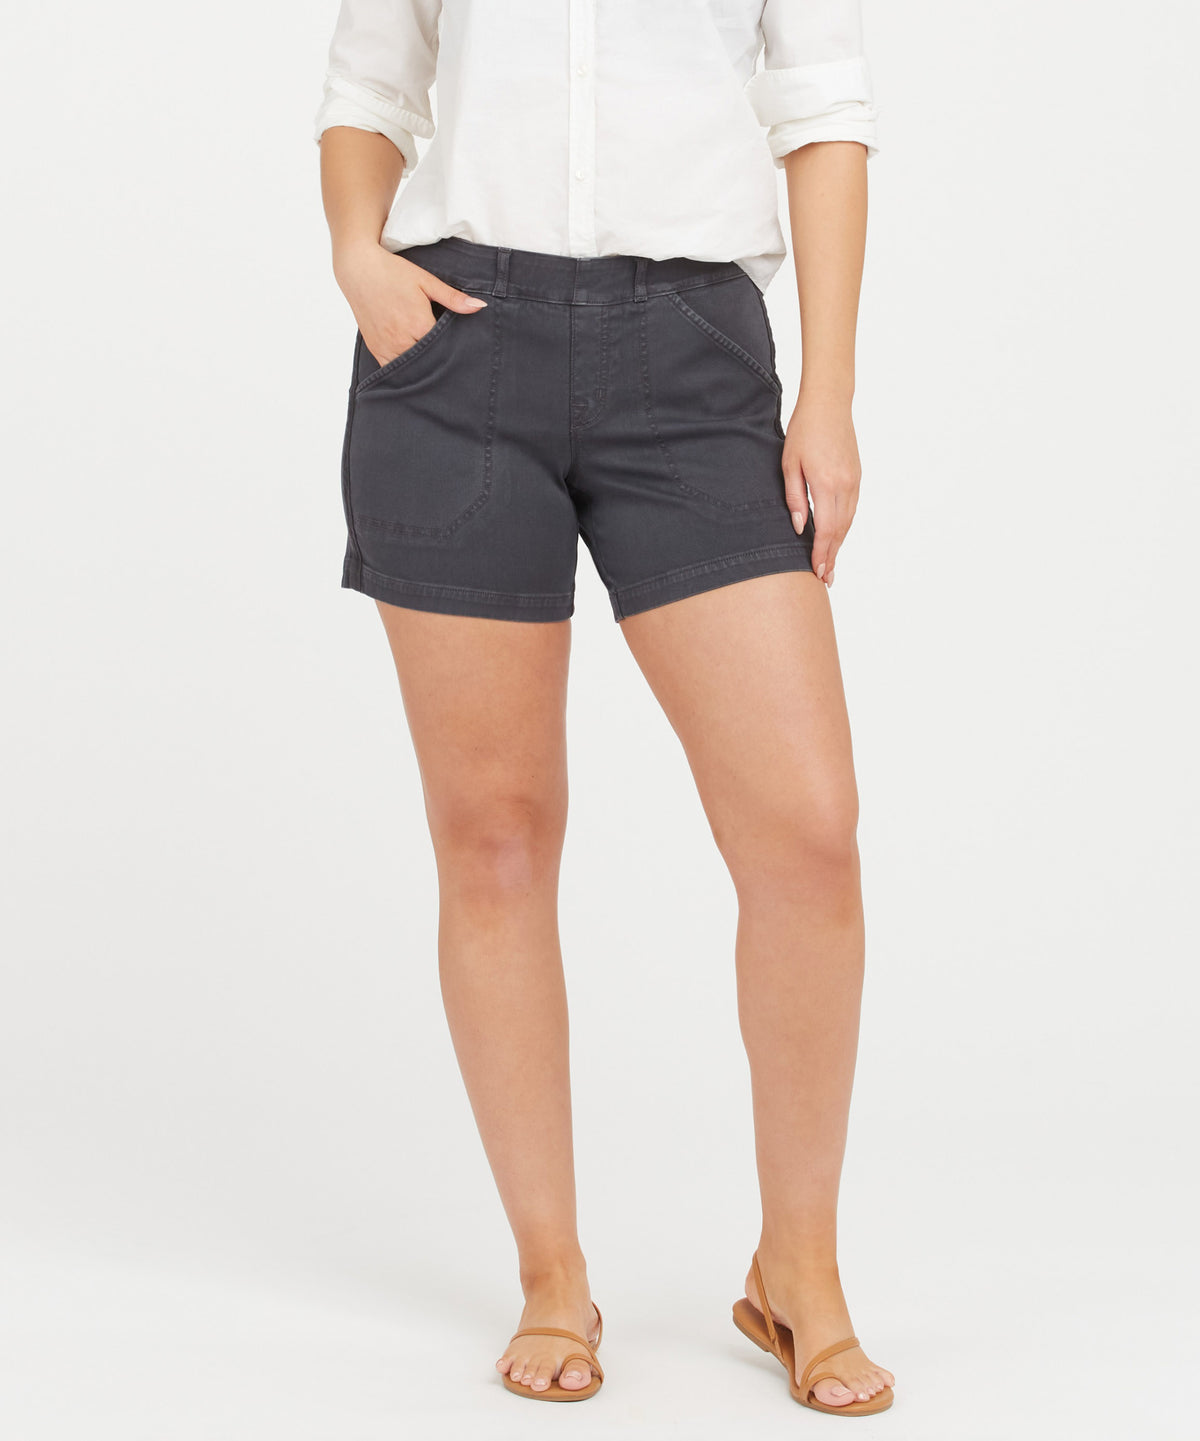 Spanx Stretch Twill Shorts, 6 - Washed Black – She She Boutique